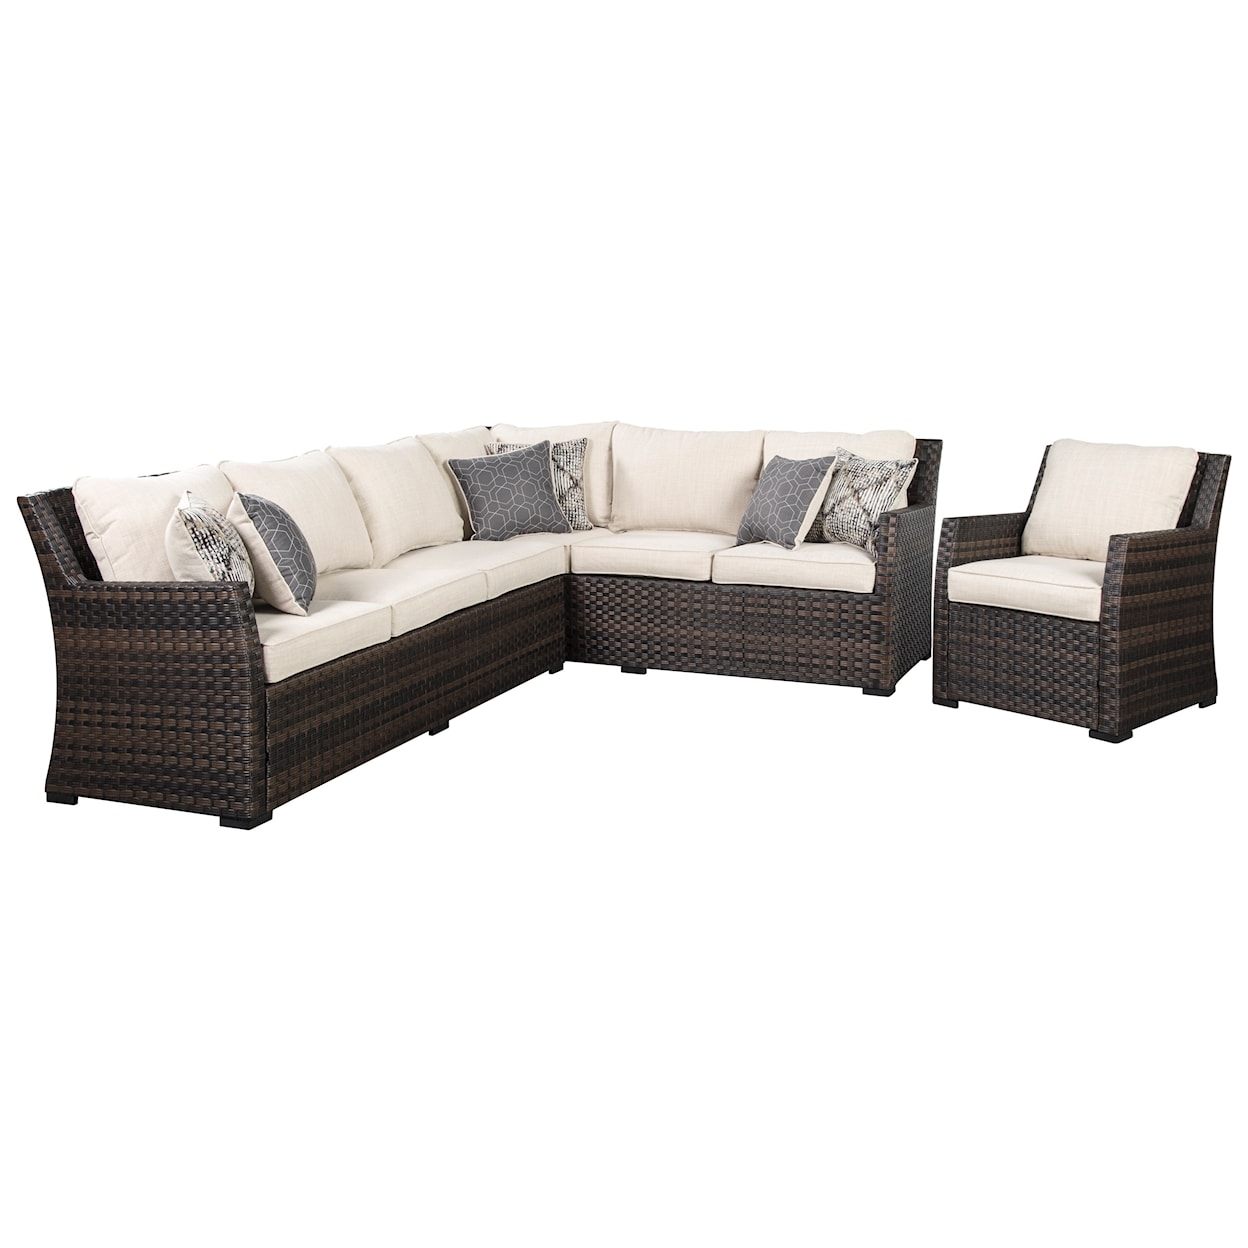 Benchcraft Easy Isle Outdoor Sectional with Table & 2 Chairs